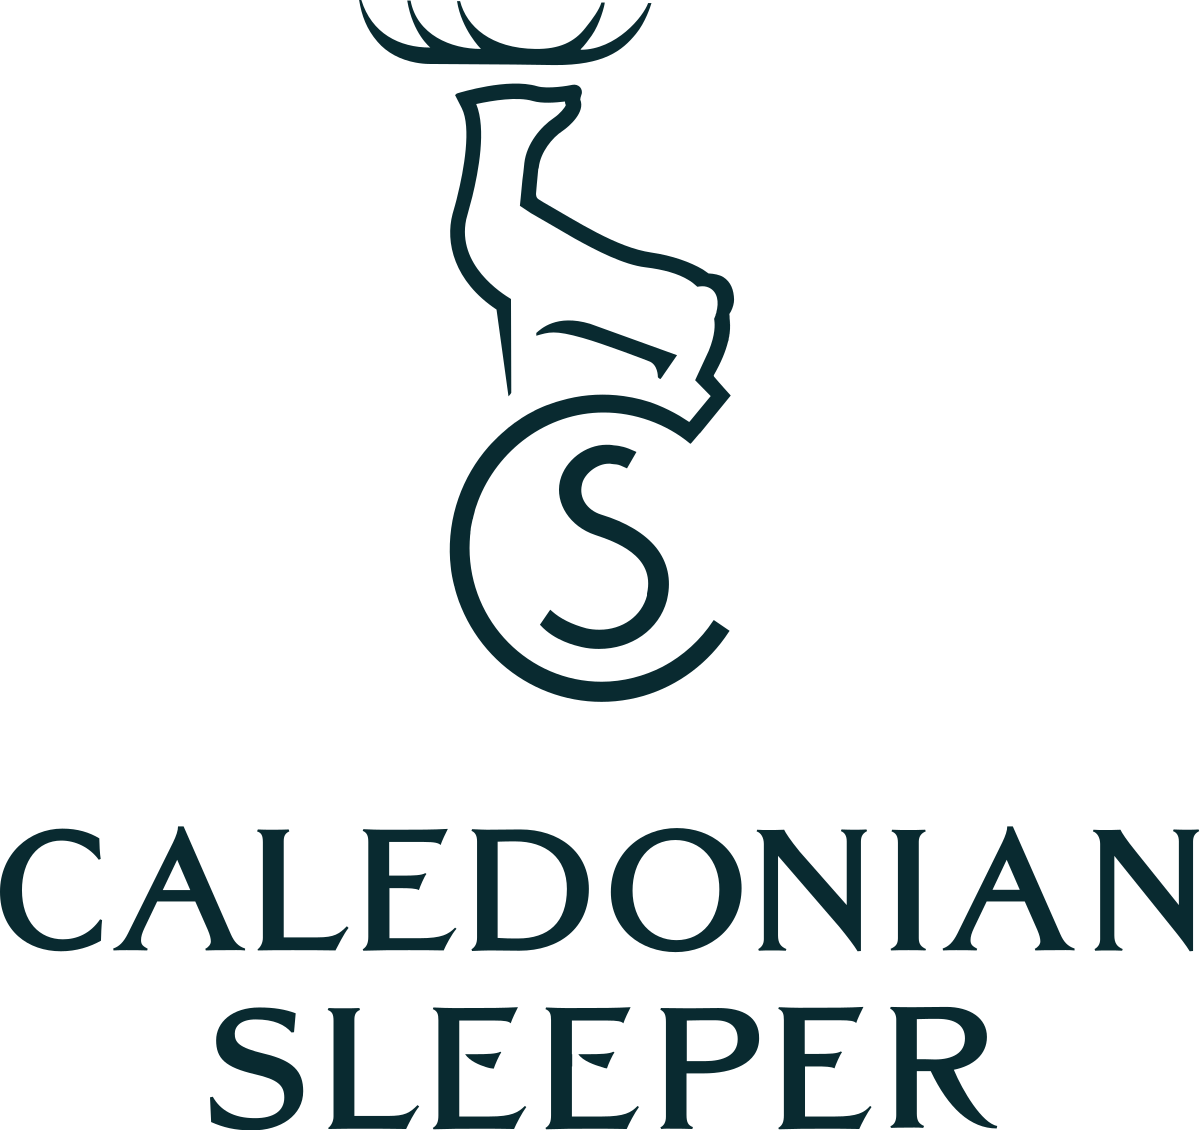 1200px-CaledonianSleeper.svg.png